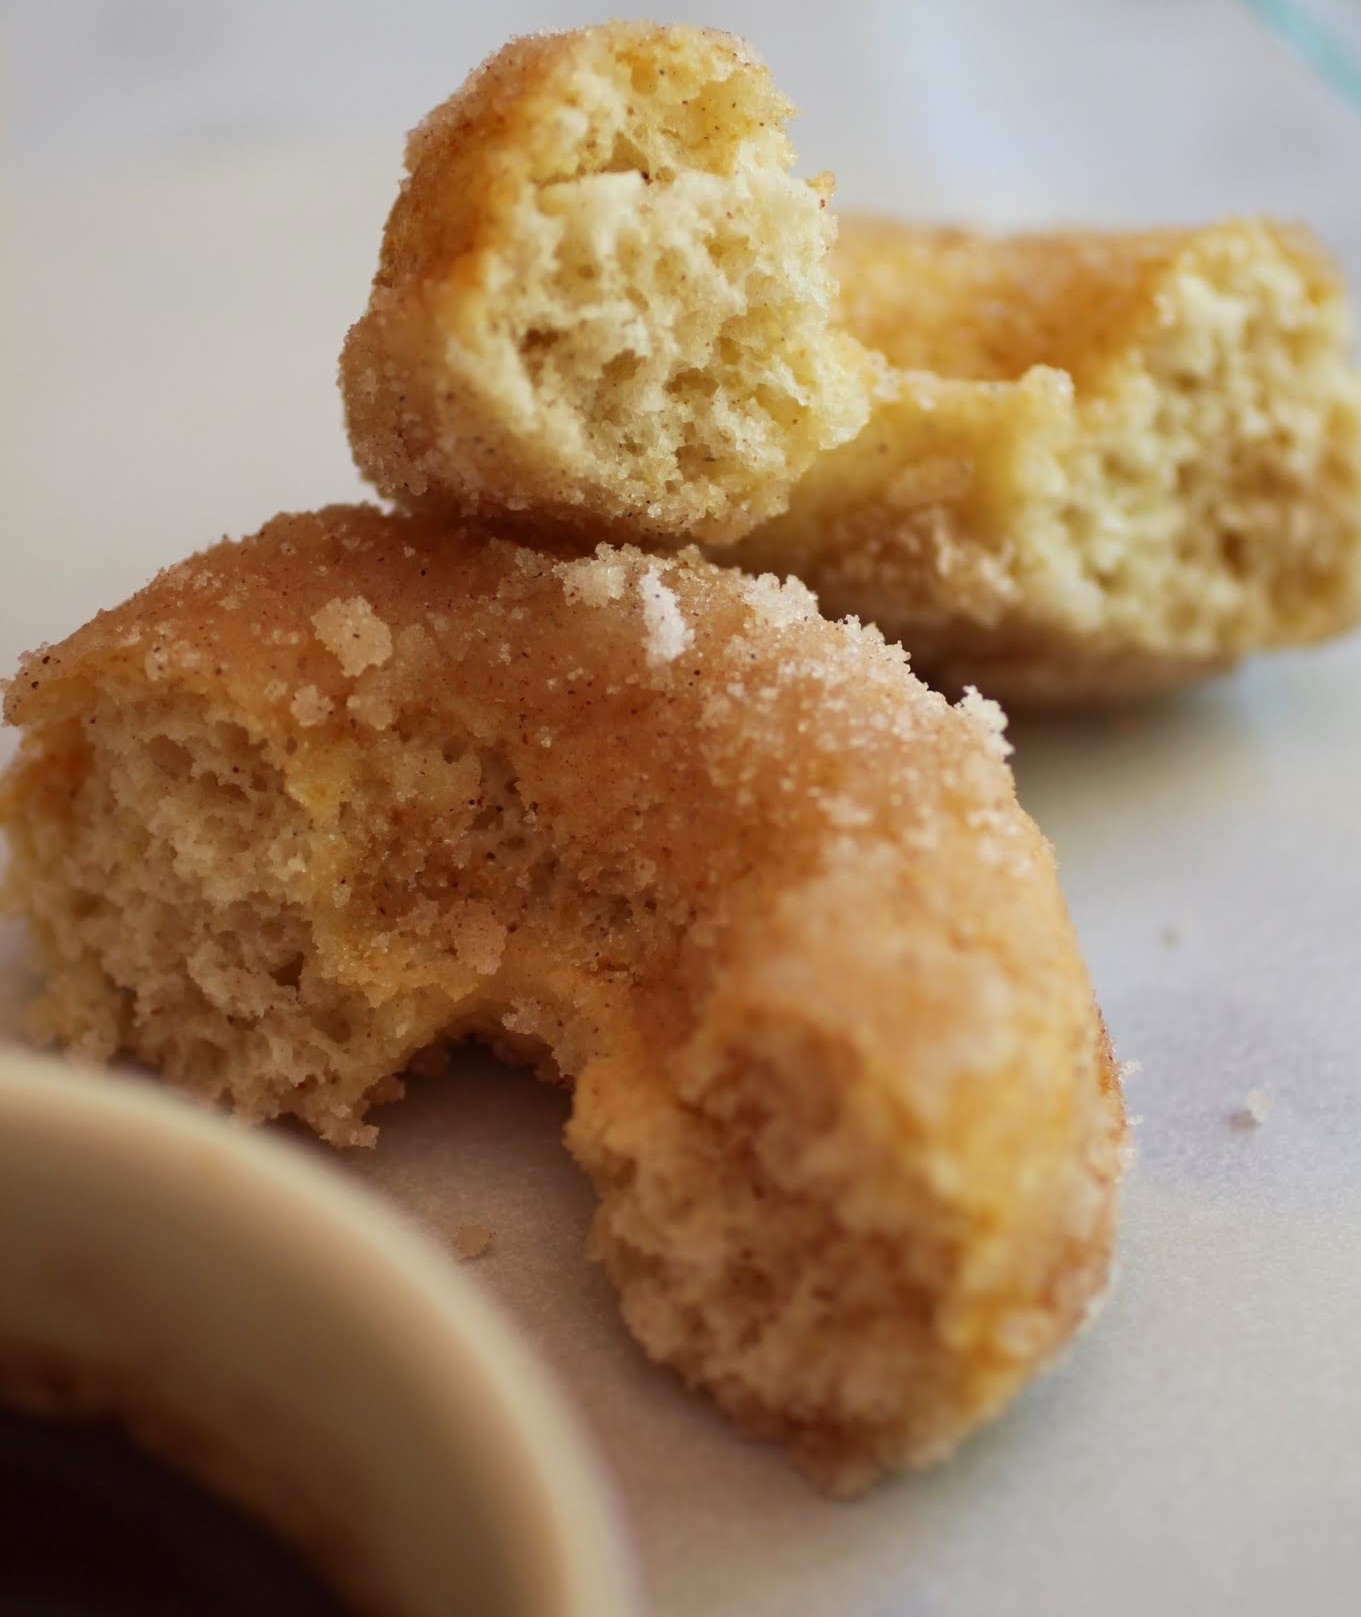 Cinnamon Donuts with Chocolate Dipping Sauce